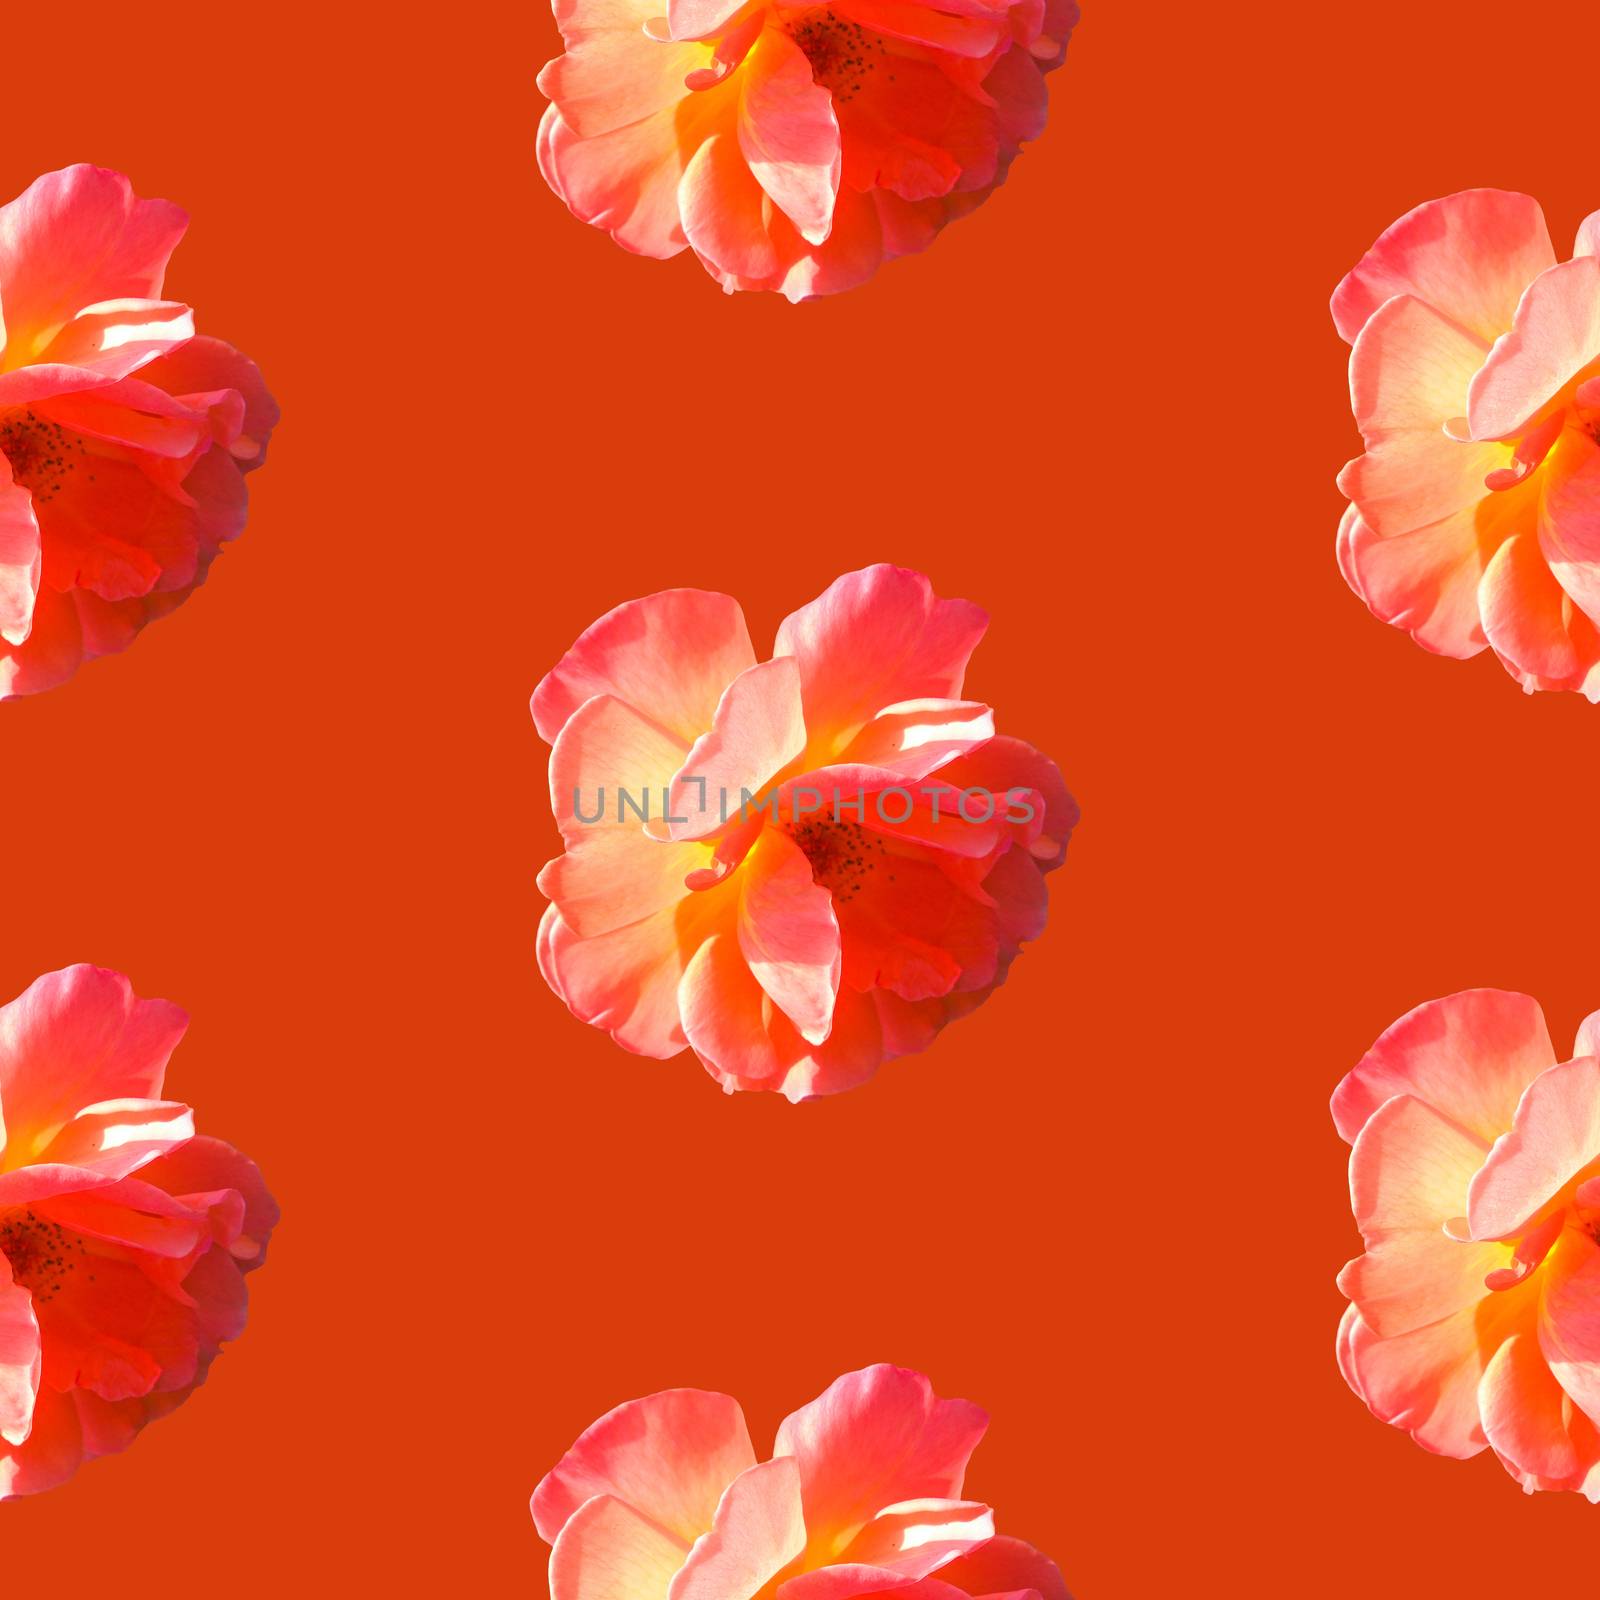 Seamless pattern with roses on a orange background. Pop art creative design for textile, fashion, wallpaper, fabric, wrapping paper.